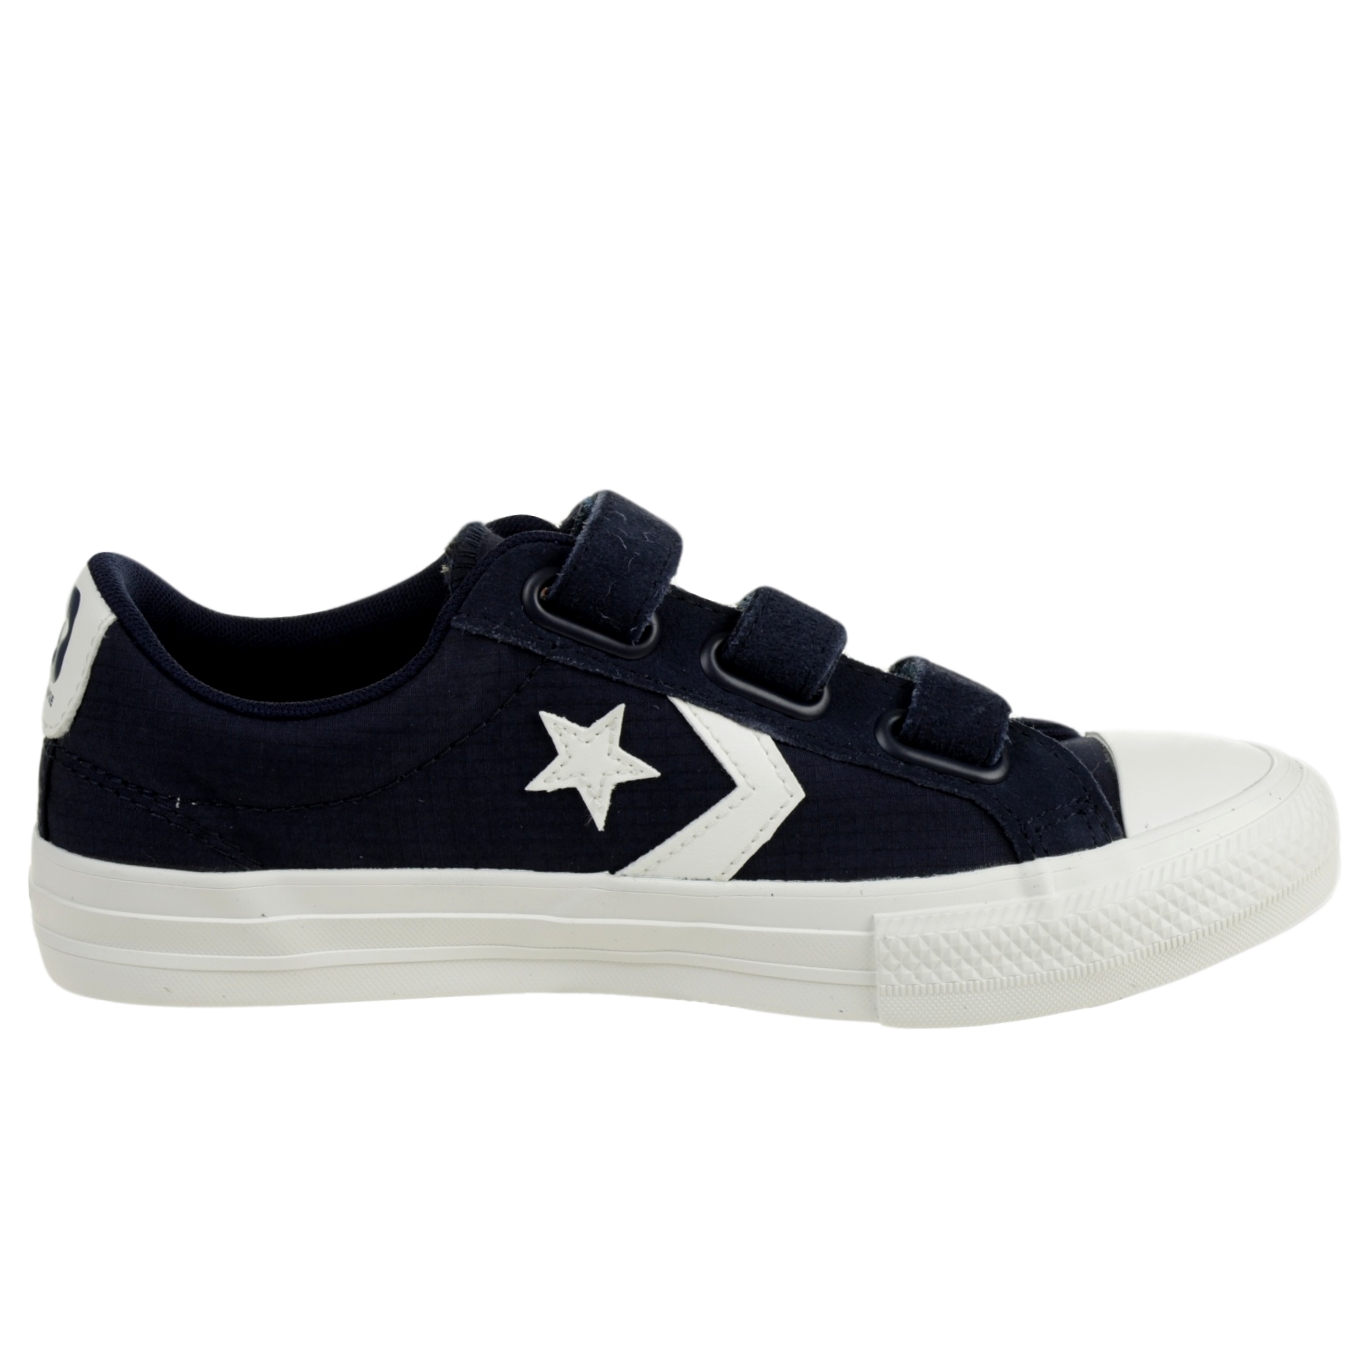 Converse CTAS 3V OX Easy-On Star Player Low Top Kinder Sneaker 667547C Blau